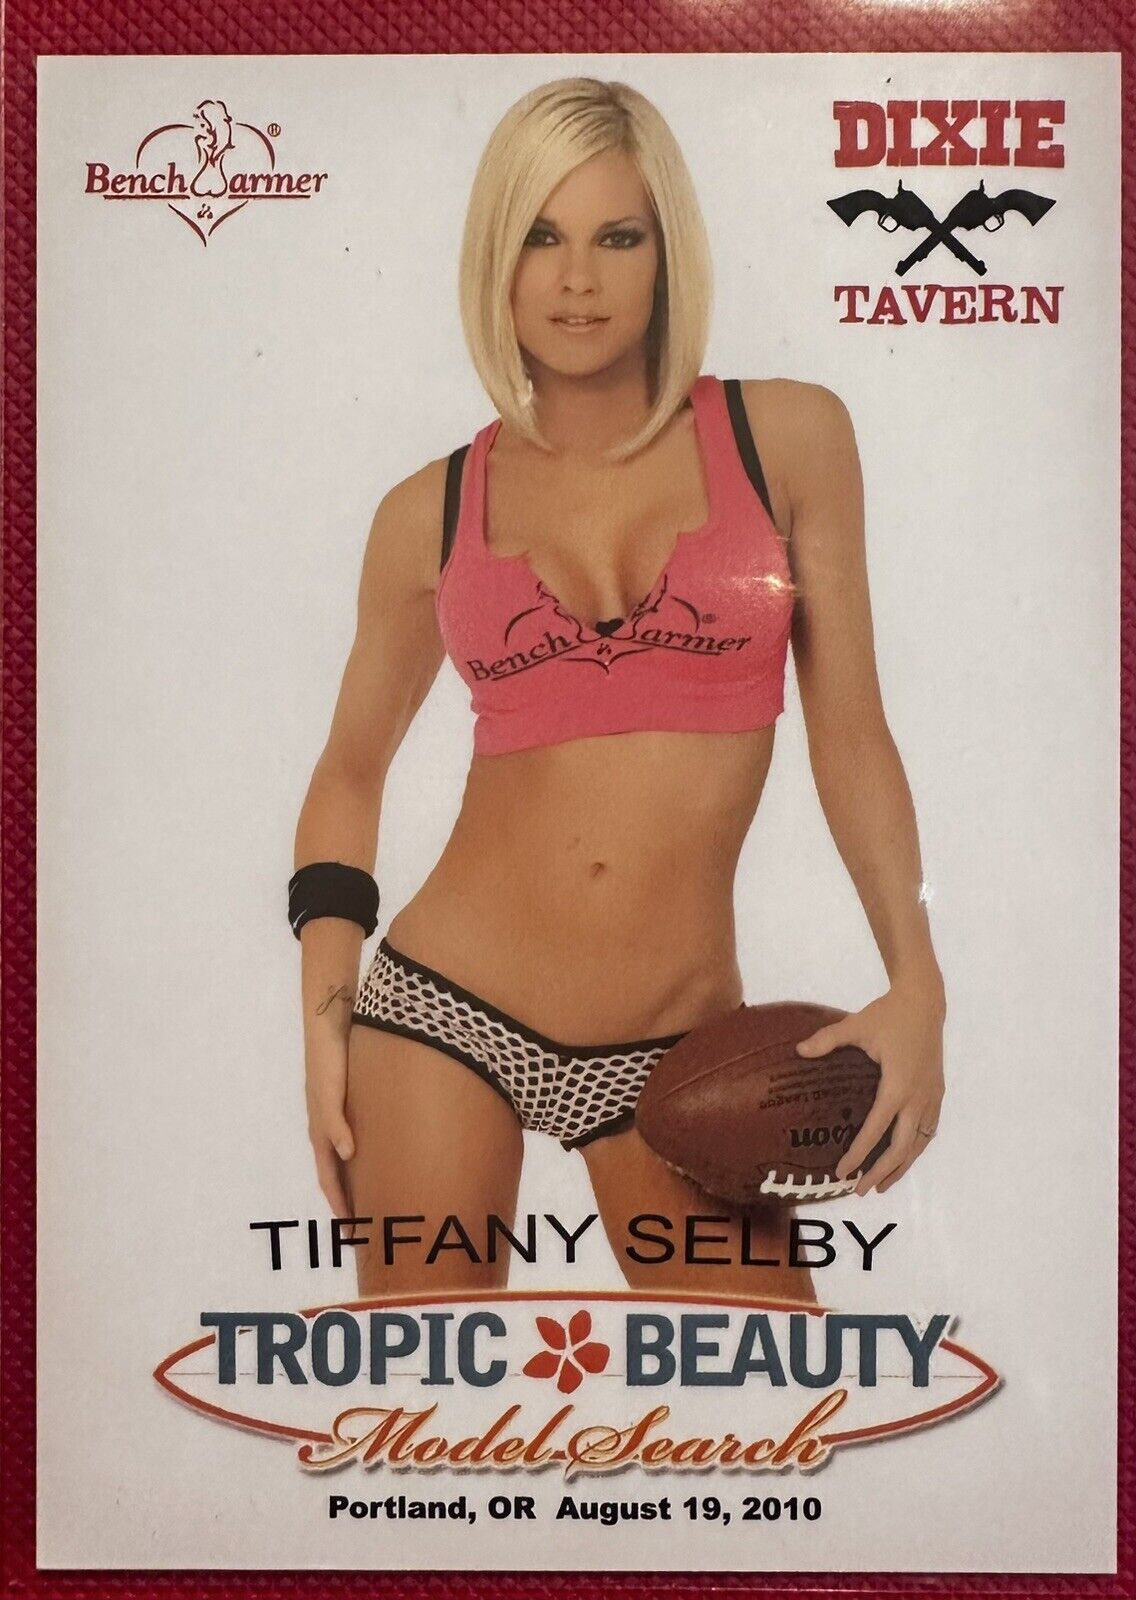 TIFFANY SELBY 2010 BenchWarmer Tropic Beauty Model Search #11 Dixie Tavern